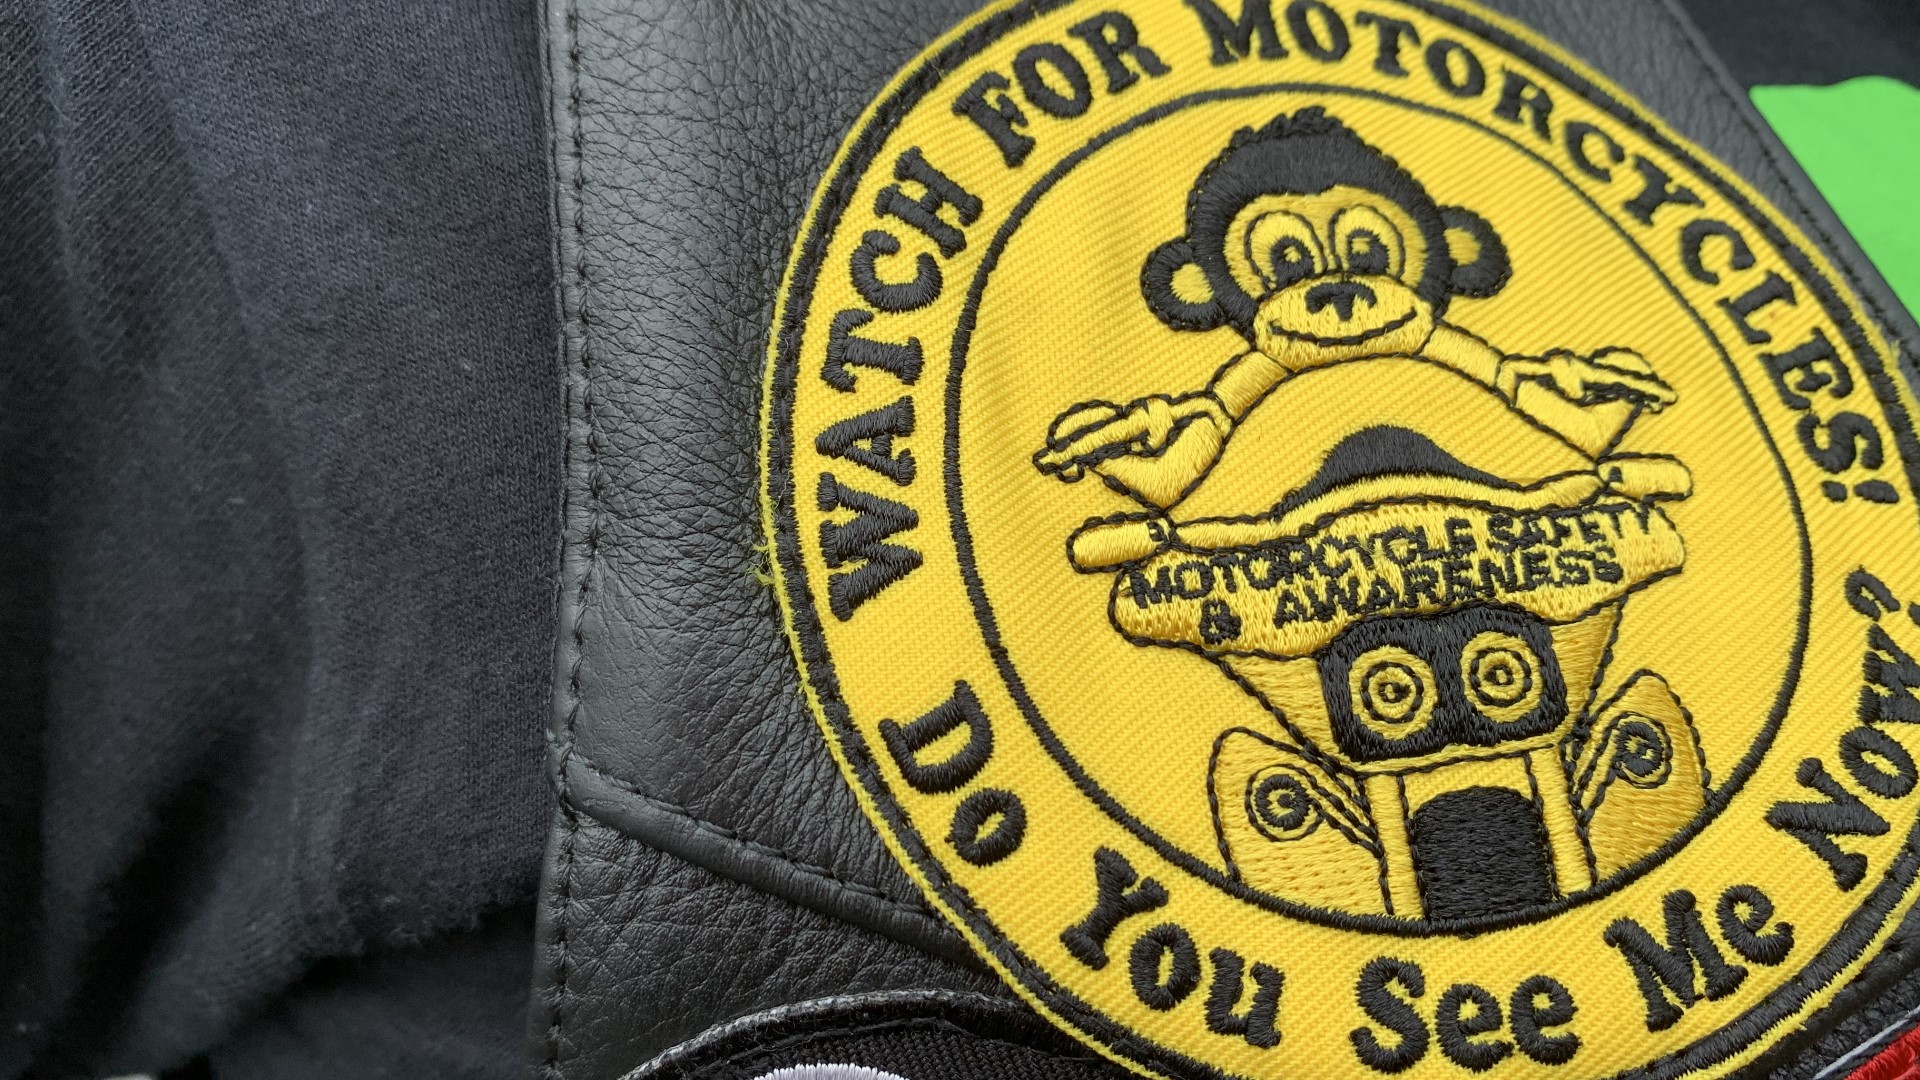 Two-hundred and fifty motorcyclists gathered for 11th annual Do You See Me Now? Motorcycle Safety & Awareness Ride Of Central Texas.